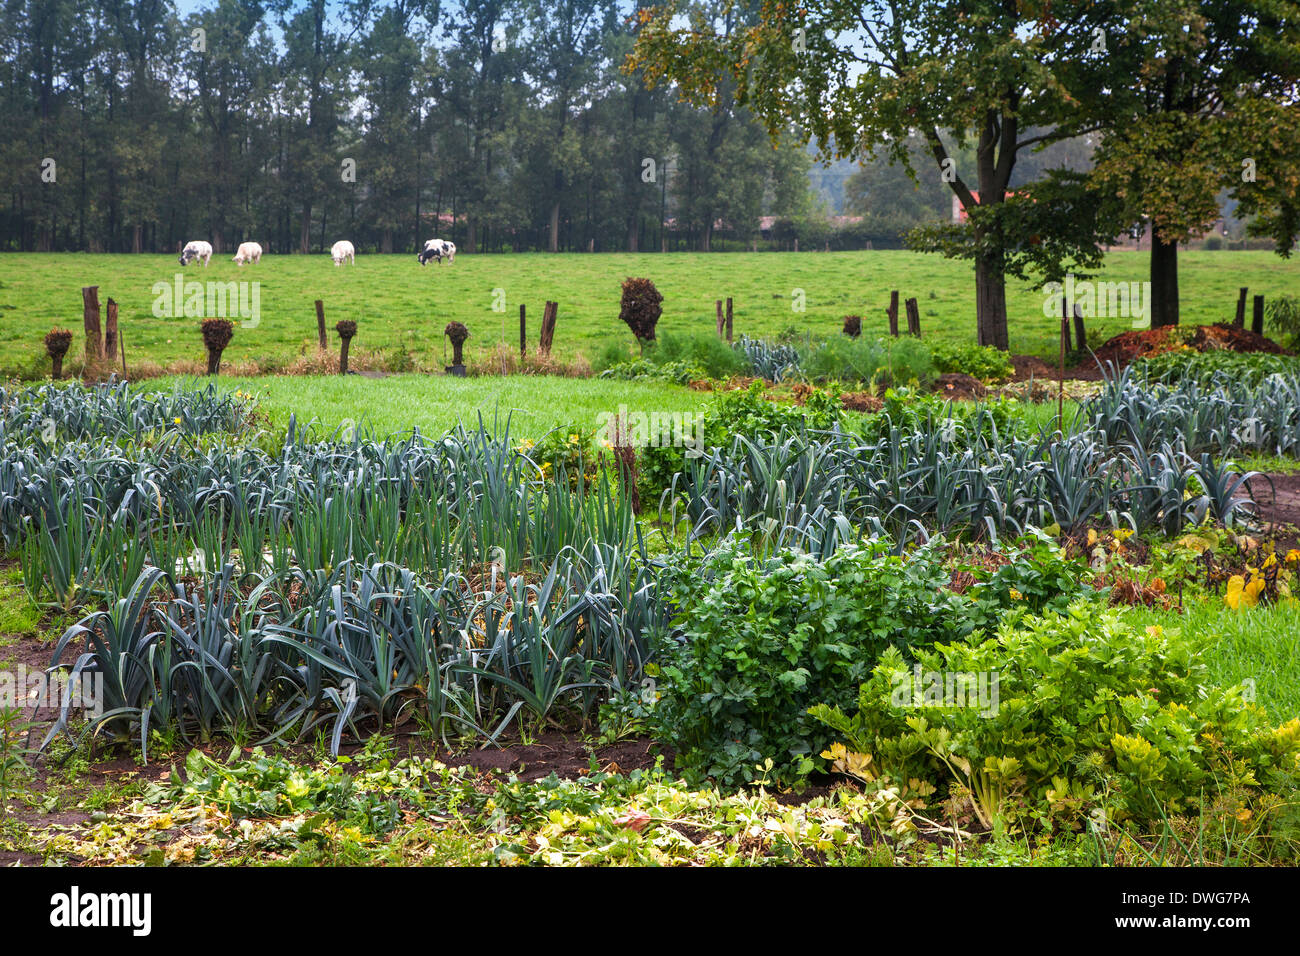 Salad, leek beds and other vegetables growing in kitchen garden / vegetable gardens / potager Stock Photo